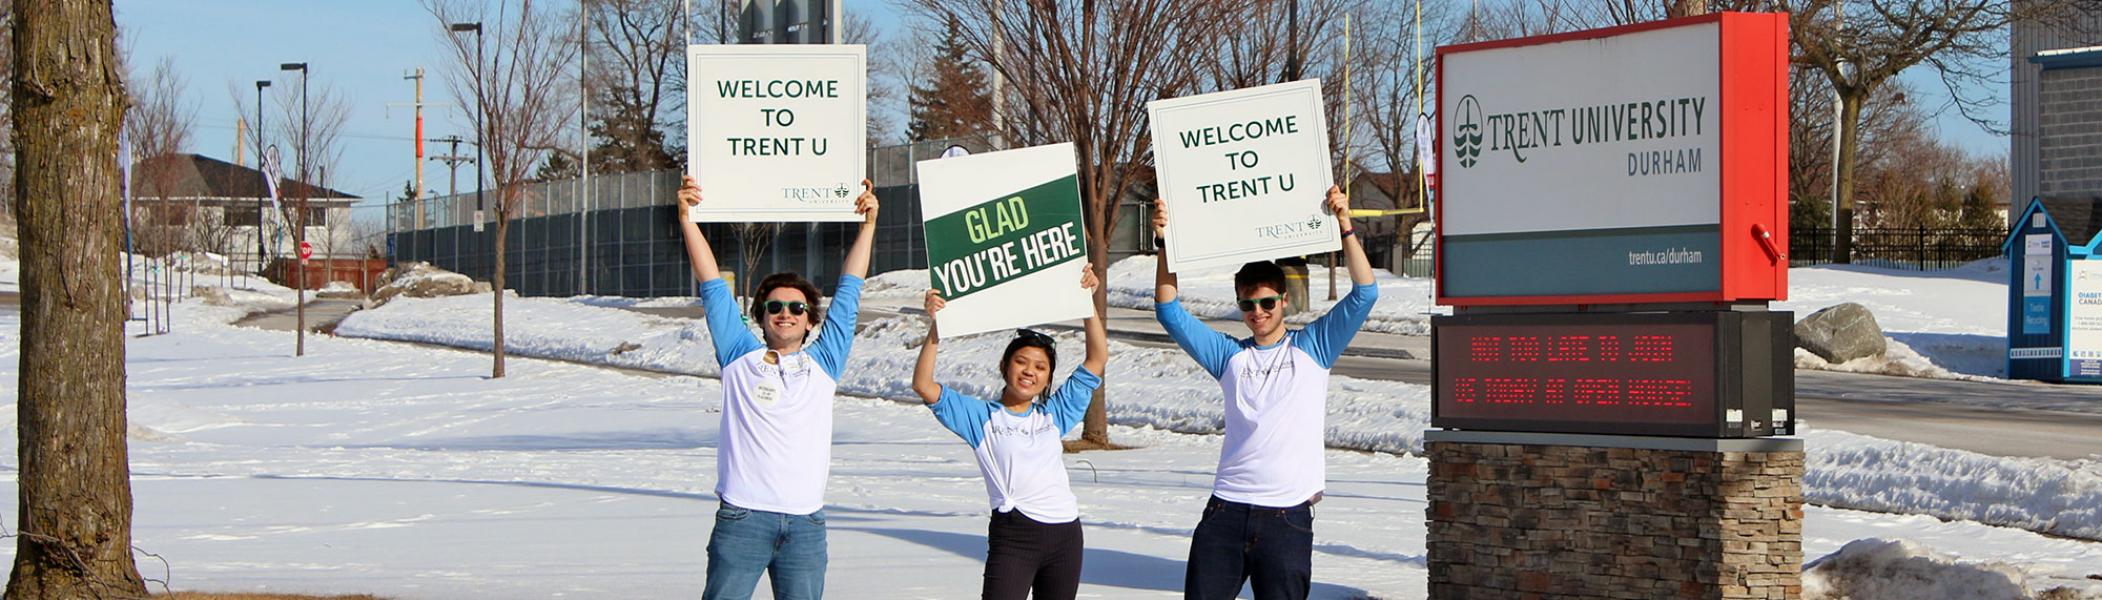 Trent University Durham students holding up welcome signs outside of the campus open house event.